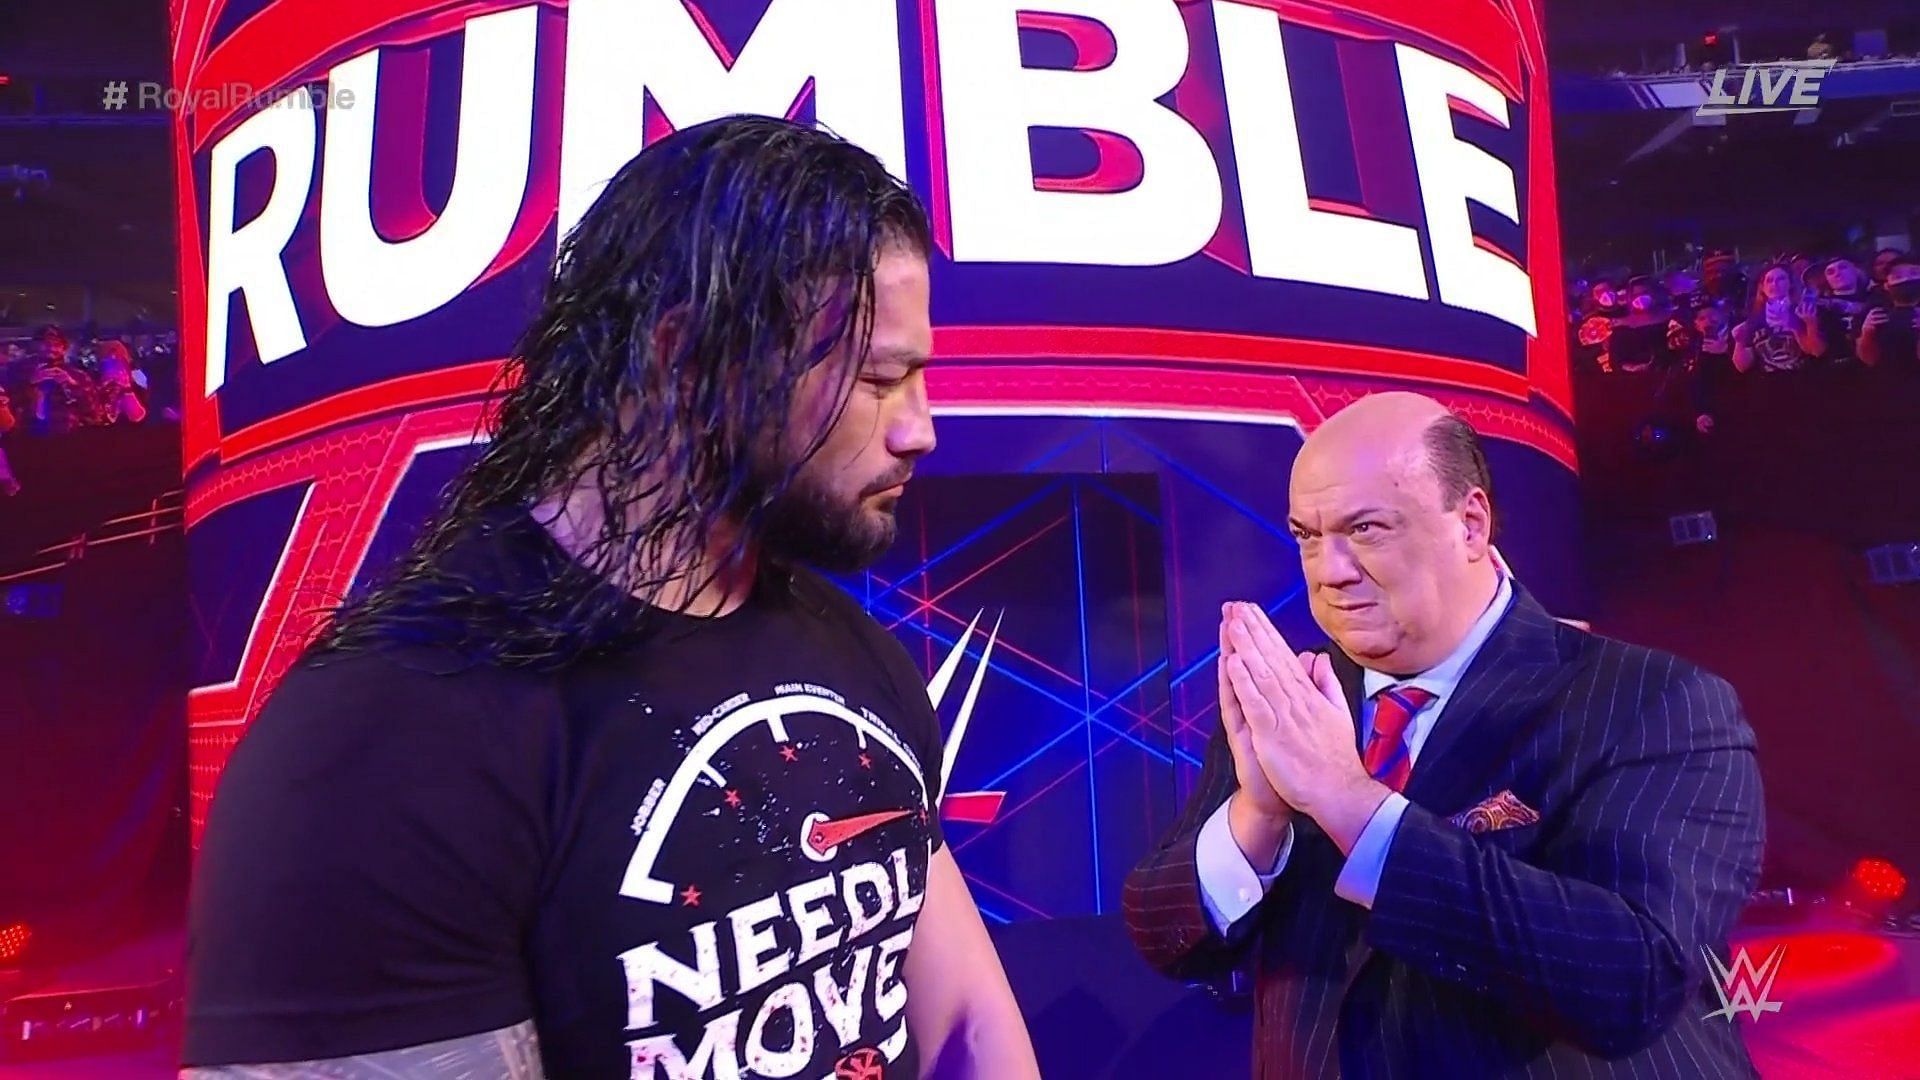 Roman Reigns reunited with Paul Heyman at the 2022 Royal Rumble premium live event